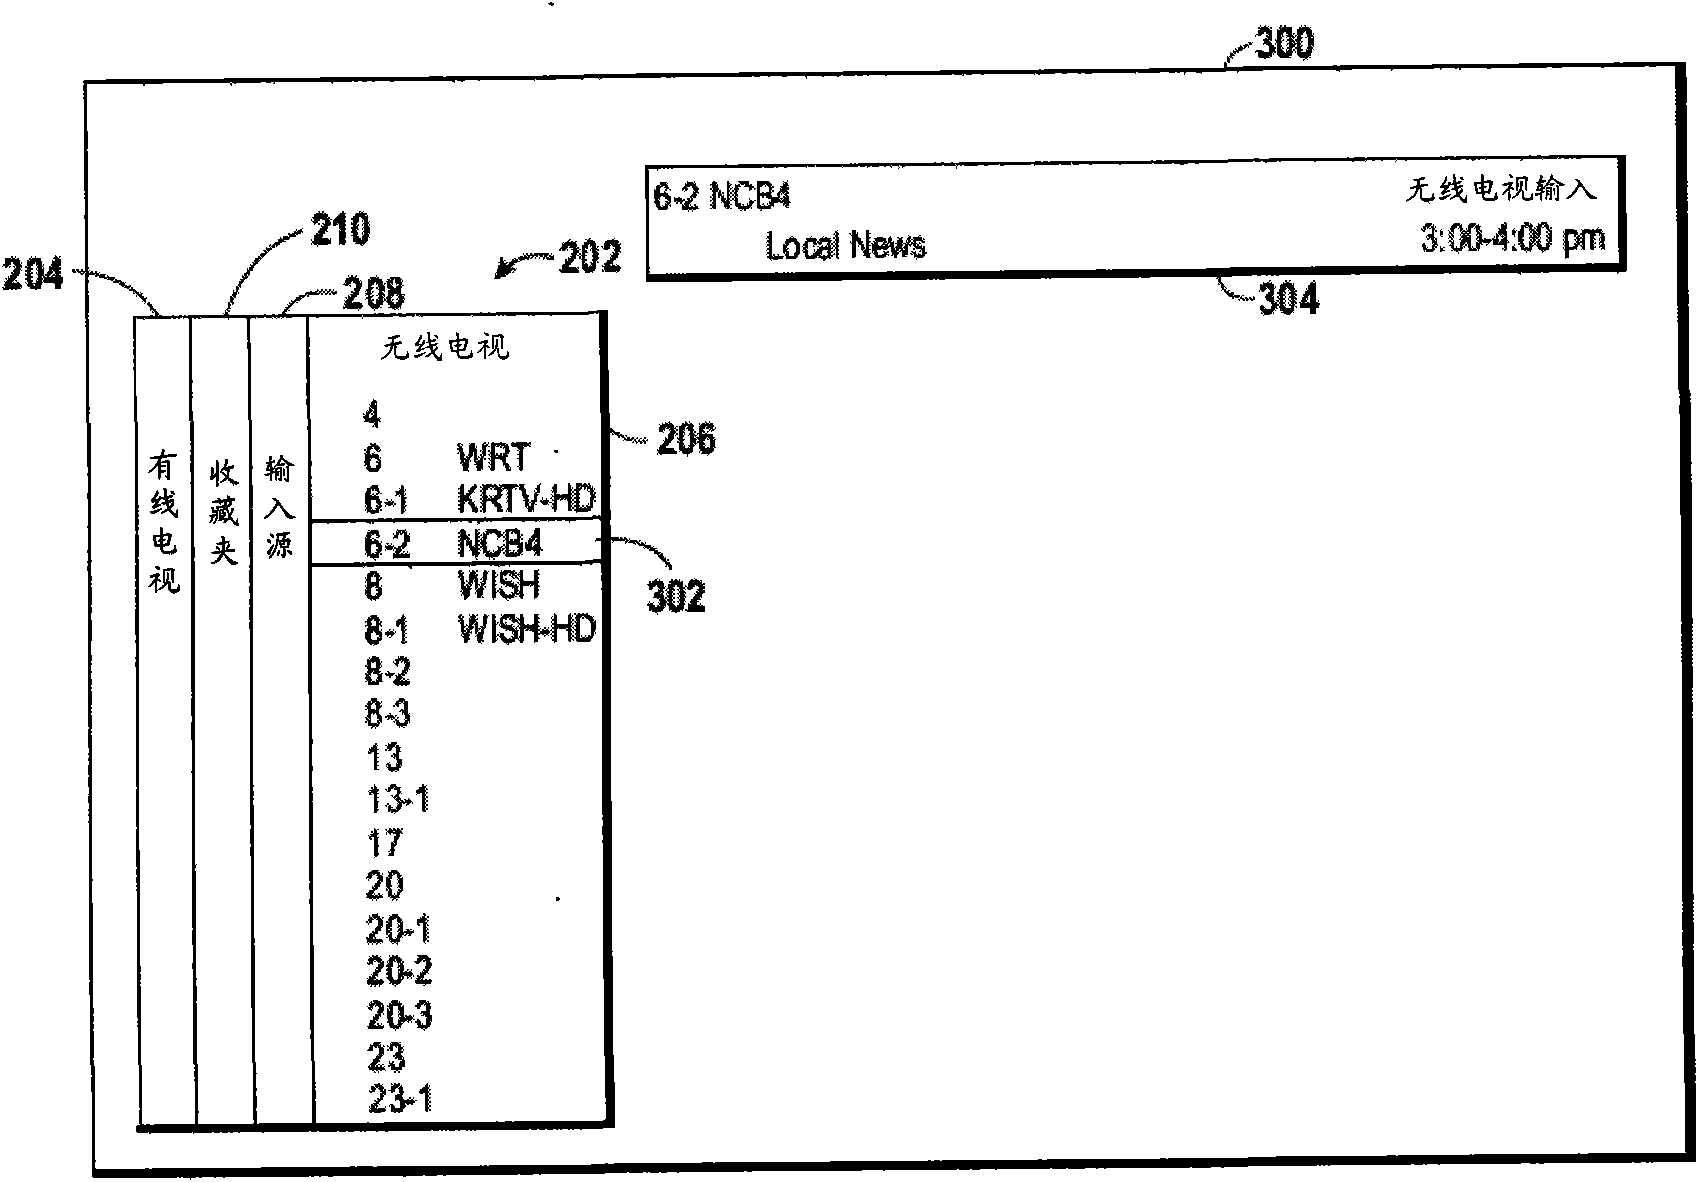 System and method for selecting television programs